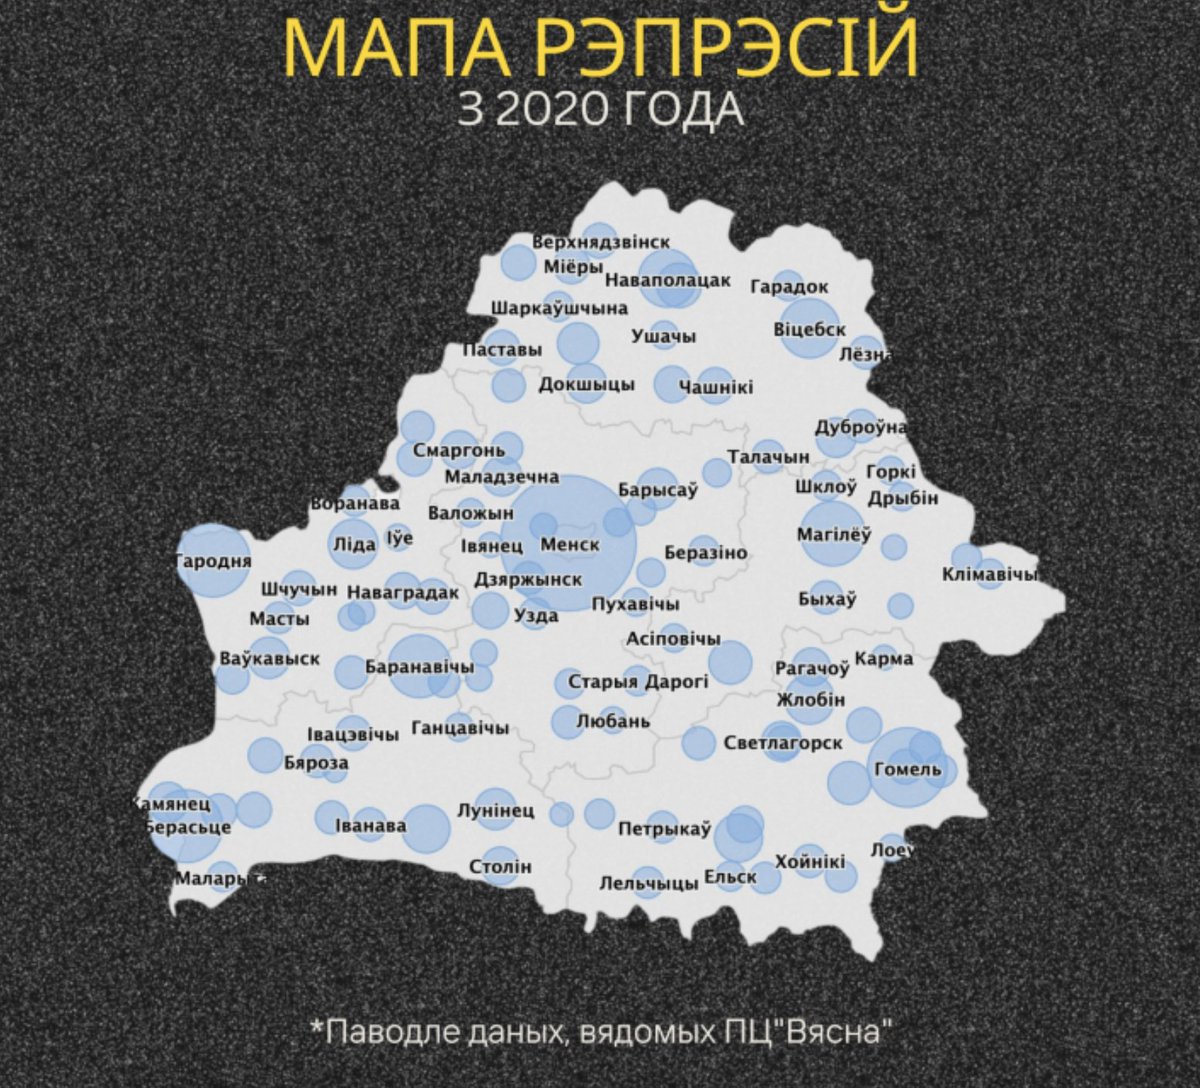 This is a map of repressions in #Belarus. The entire country has been affected, with people in every corner of Belarus being arrested and sentenced to jail. Protests have occurred in more than 80 cities and smaller towns. Remember this. The map is according to @viasna96.